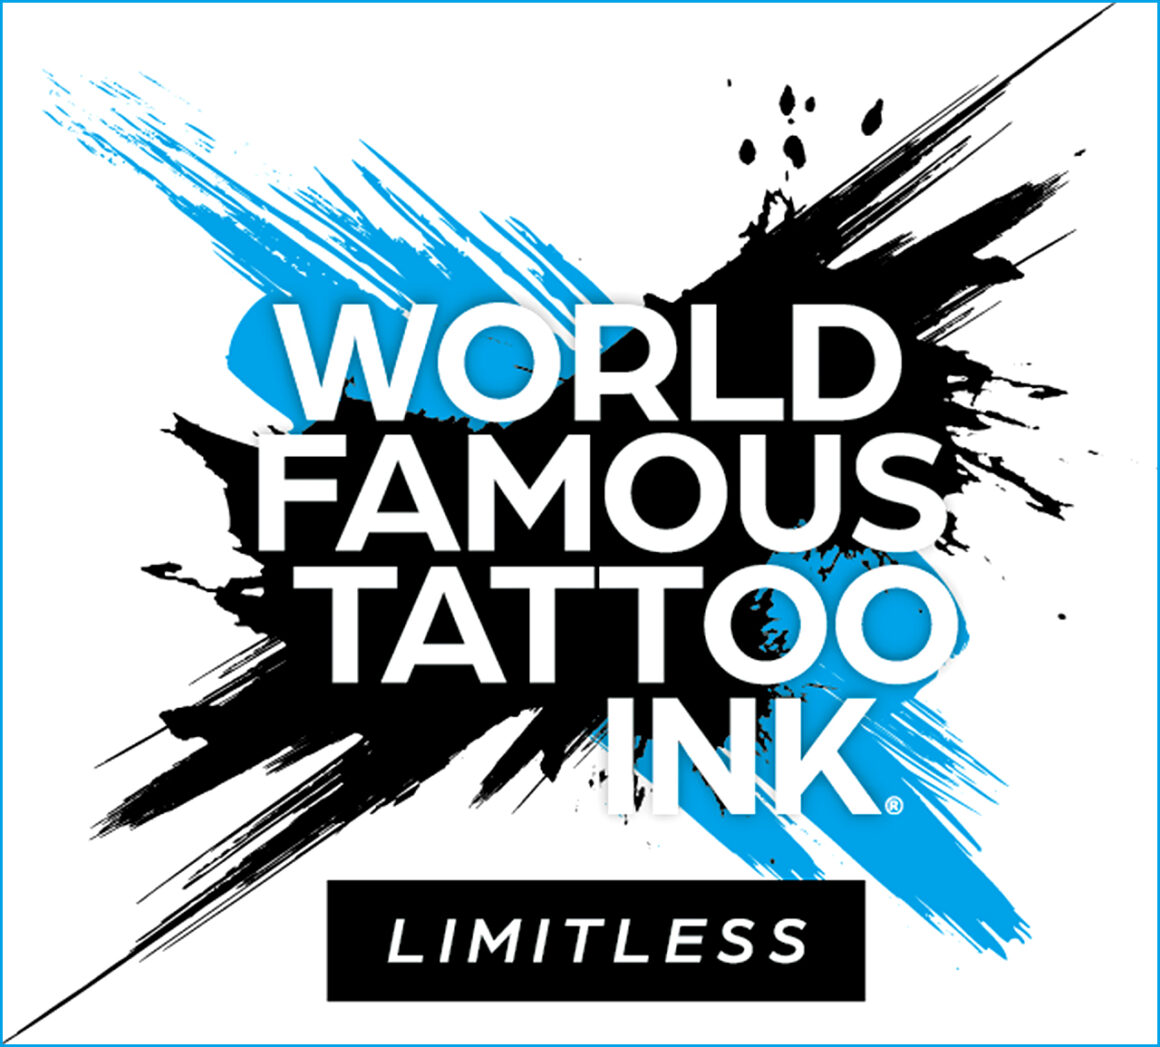 World Famous Tattoo Ink, Limitless